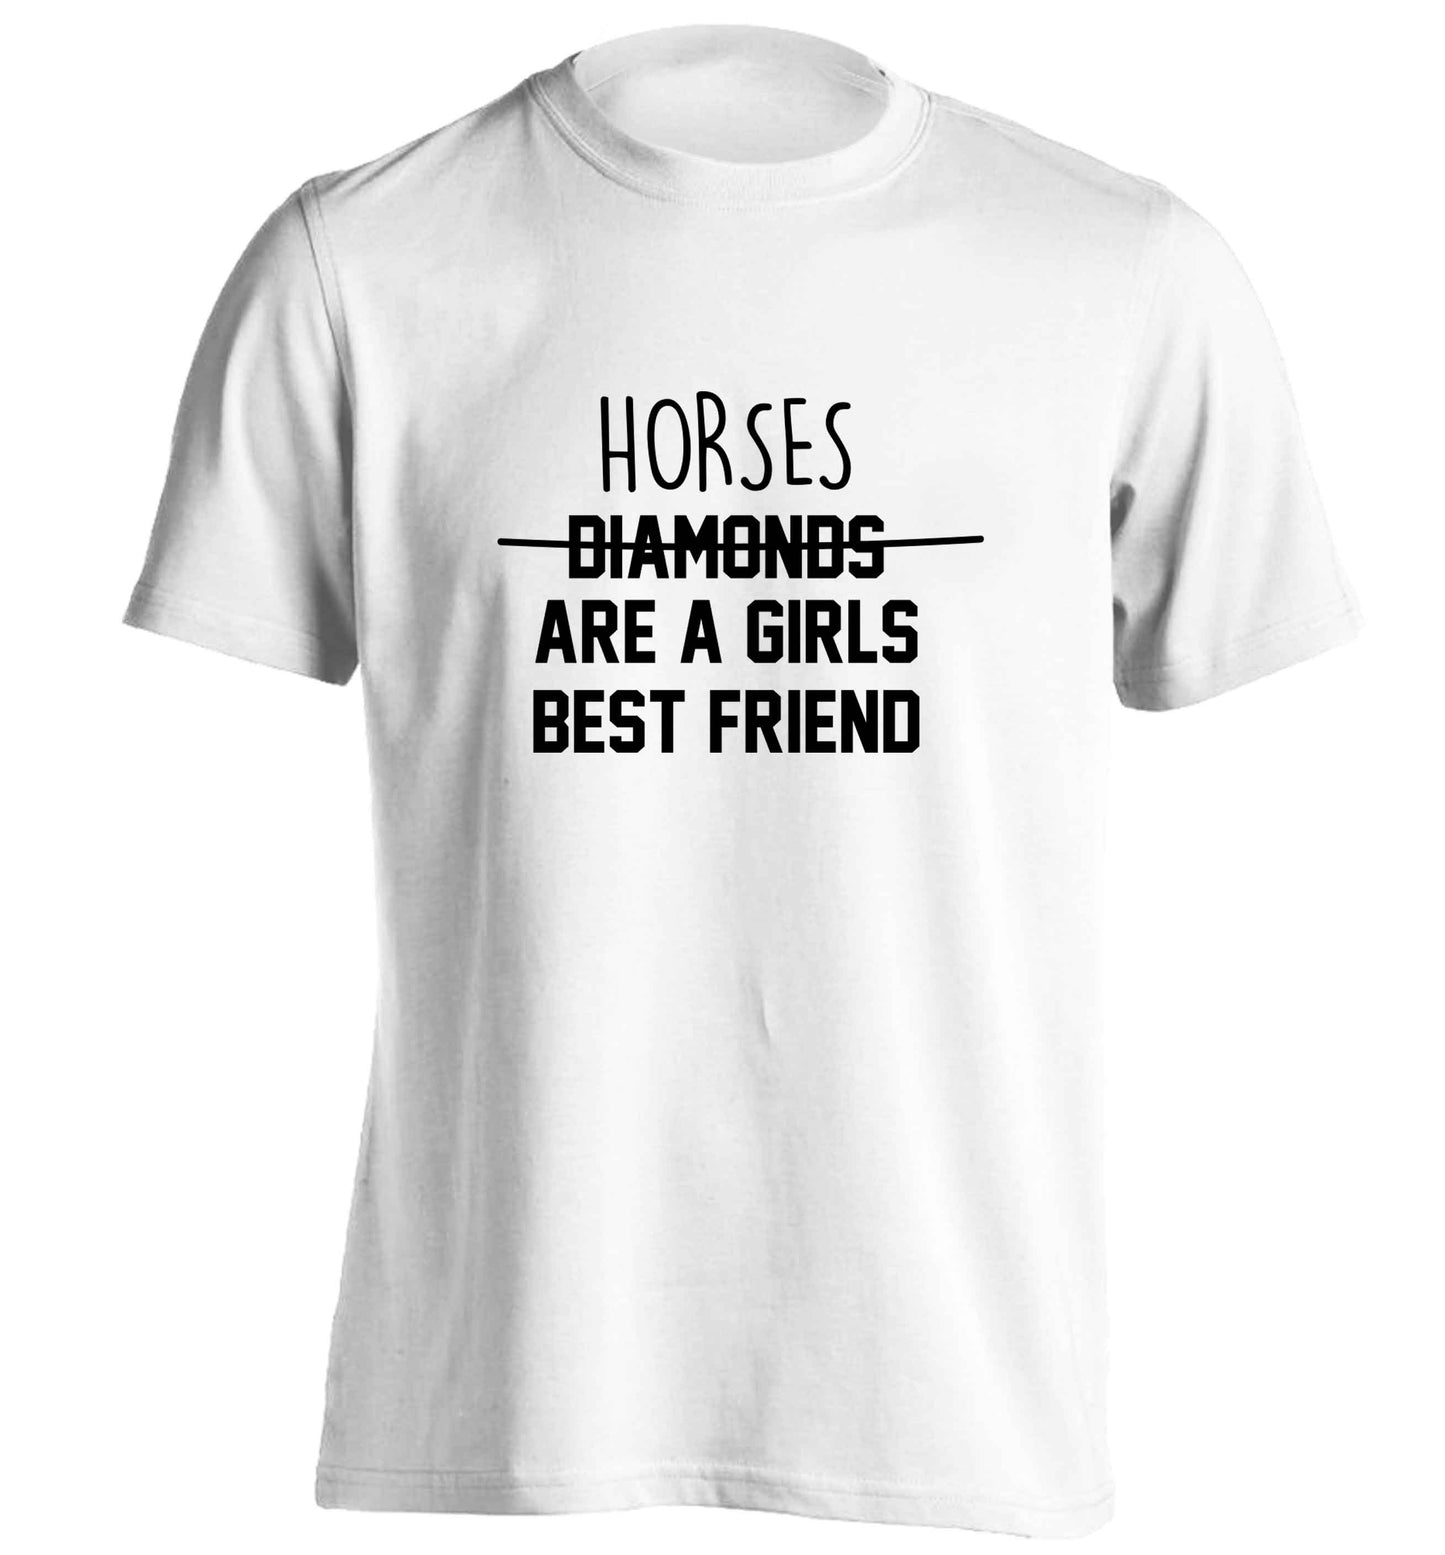 Horses are a girls best friend adults unisex white Tshirt 2XL